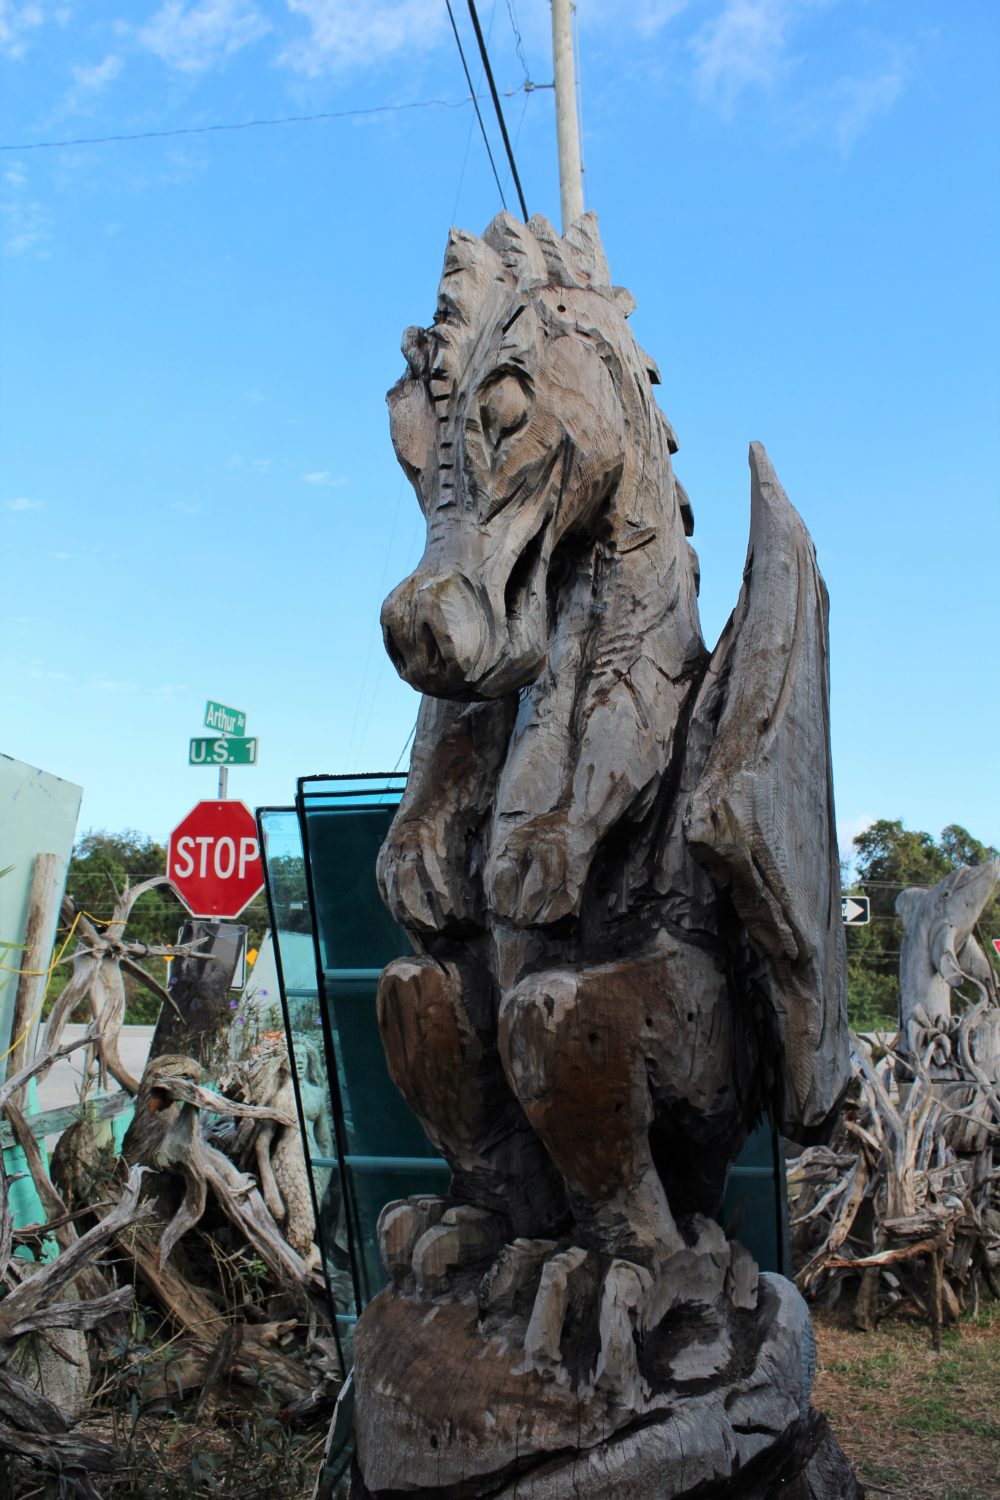 This dragon is over ten feet tall!